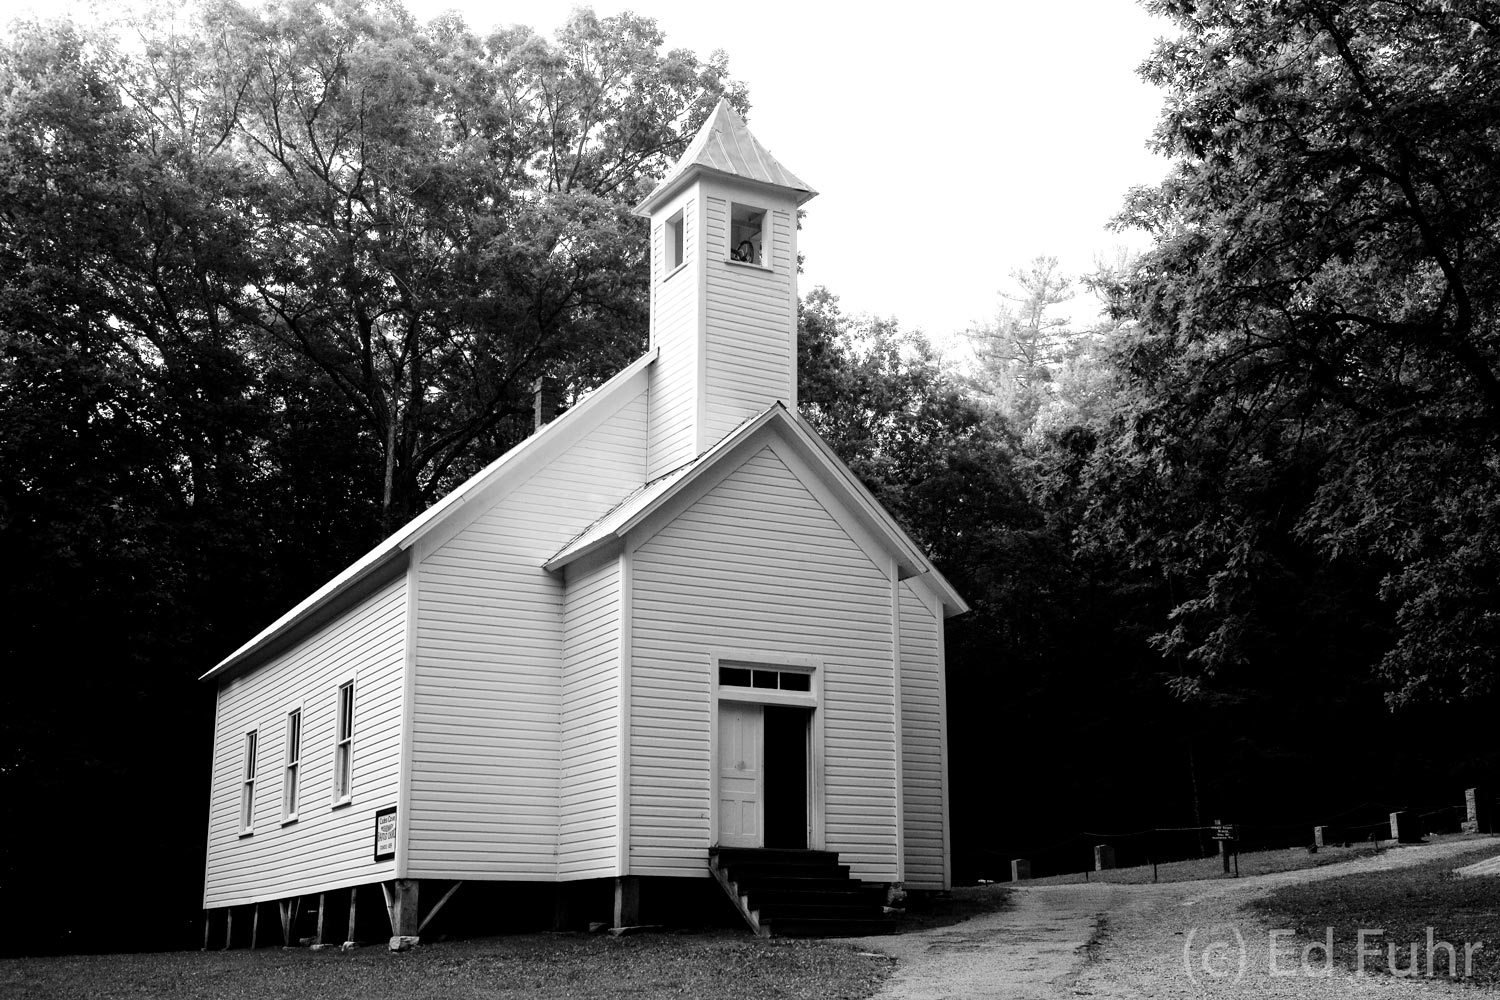 One of several churches in Cades Cove that continue to hold up some 150 years after being built.